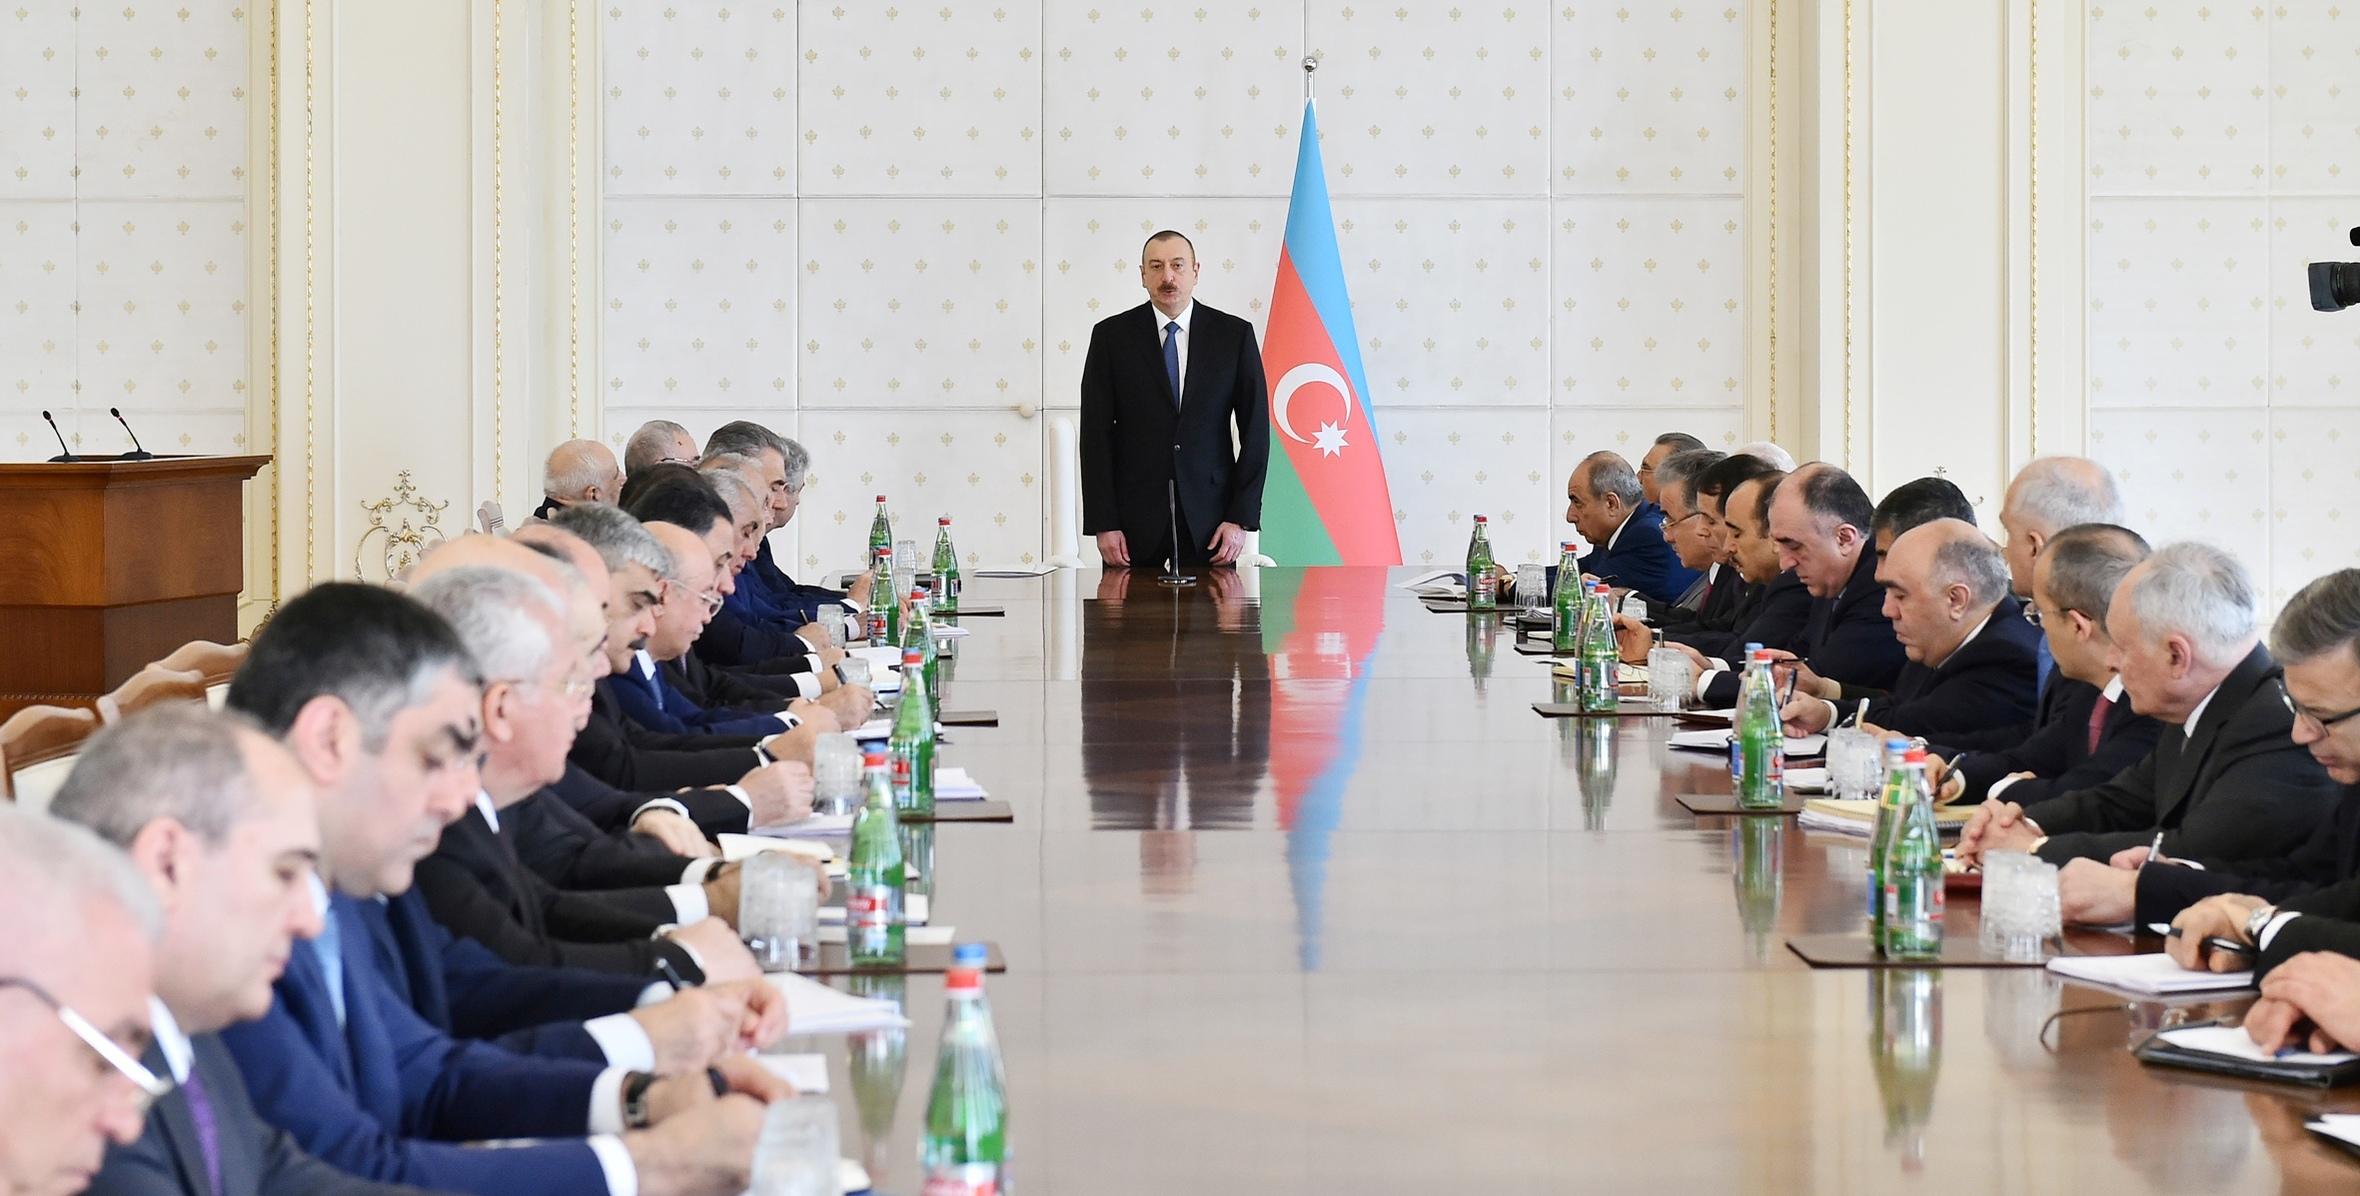 Opening speech by Ilham Aliyev at the Cabinet meeting on results of first quarter of 2018 and future tasks